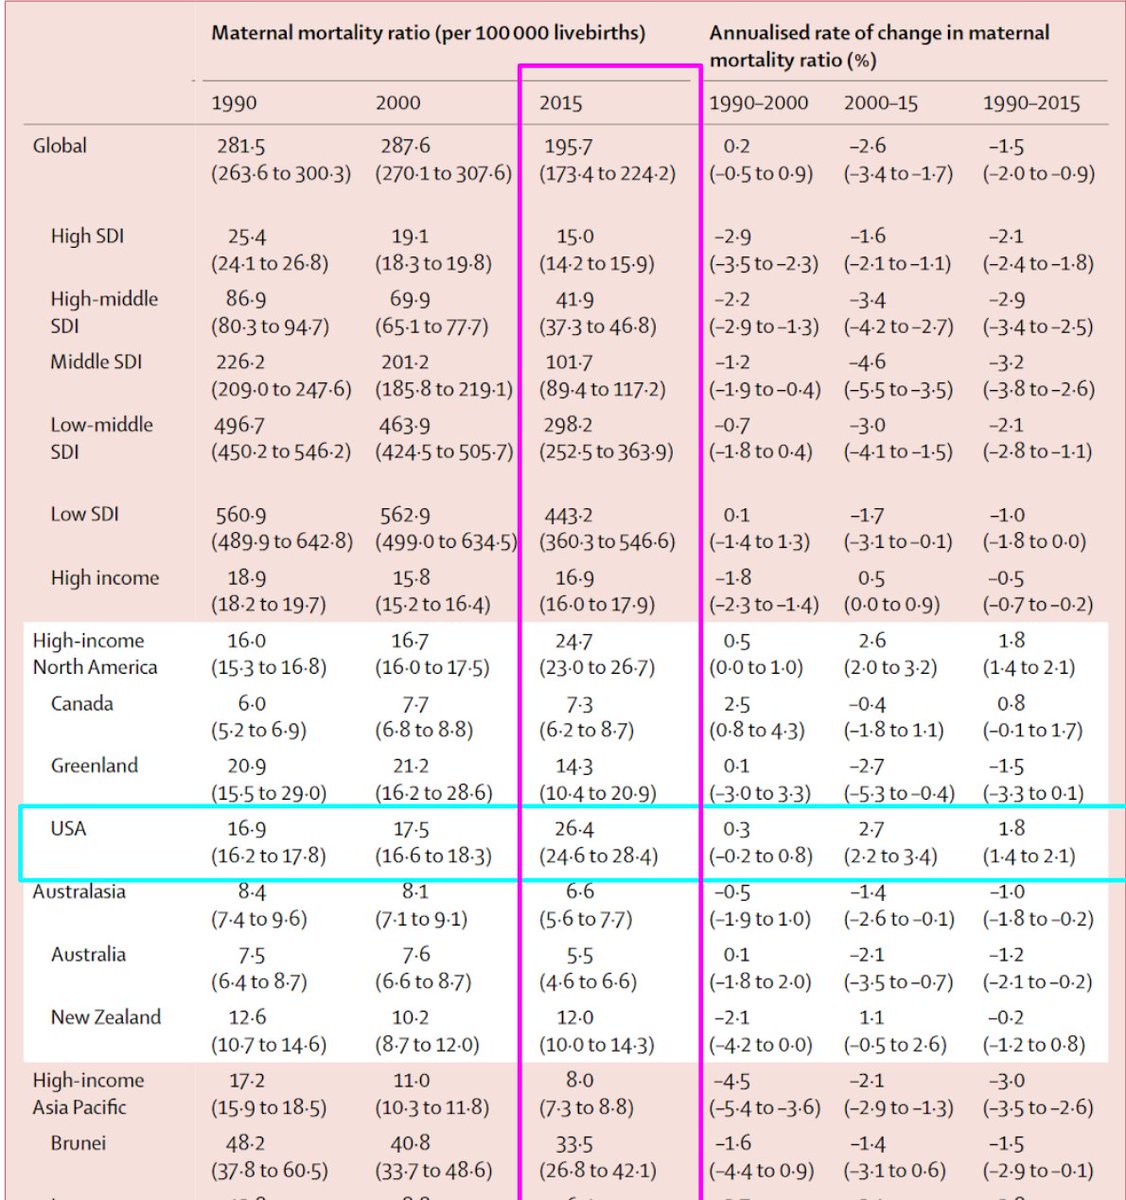 Look, maternal mortality is already horrific compared with our international peers.E.g. our rate is 5 times higher than in Australia https://www.thelancet.com/journals/lancet/article/PIIS0140-6736(16)31470-2/fulltext16/20